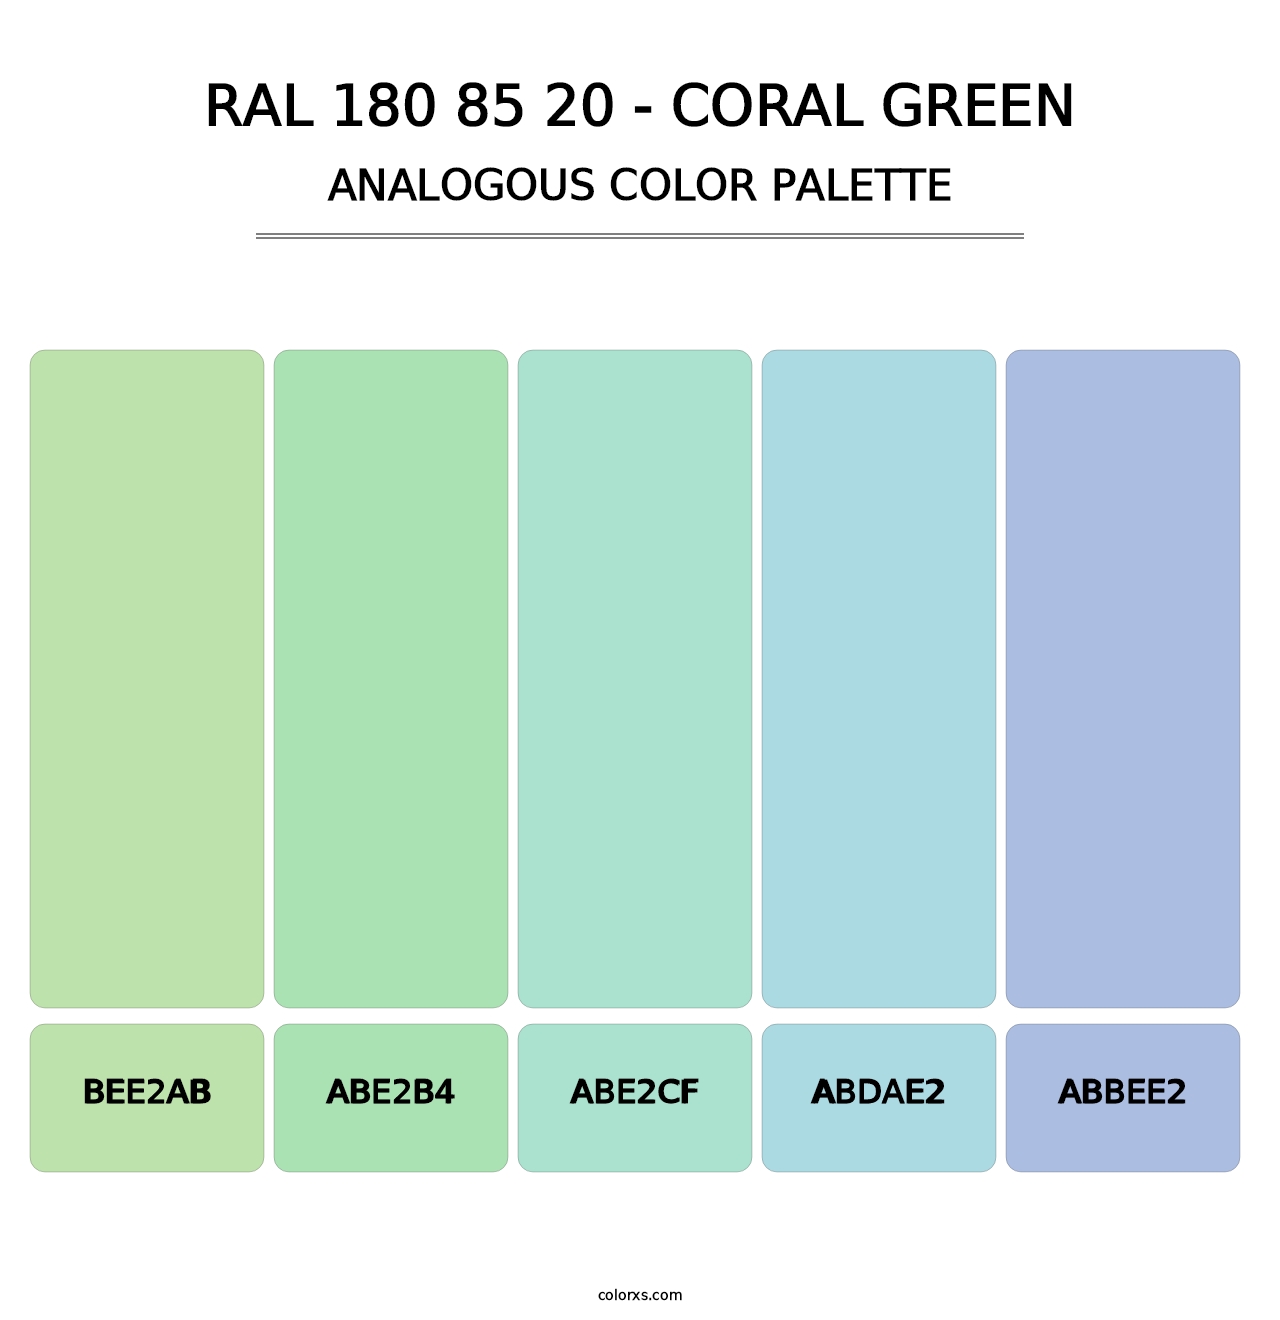 RAL 180 85 20 - Coral Green - Analogous Color Palette